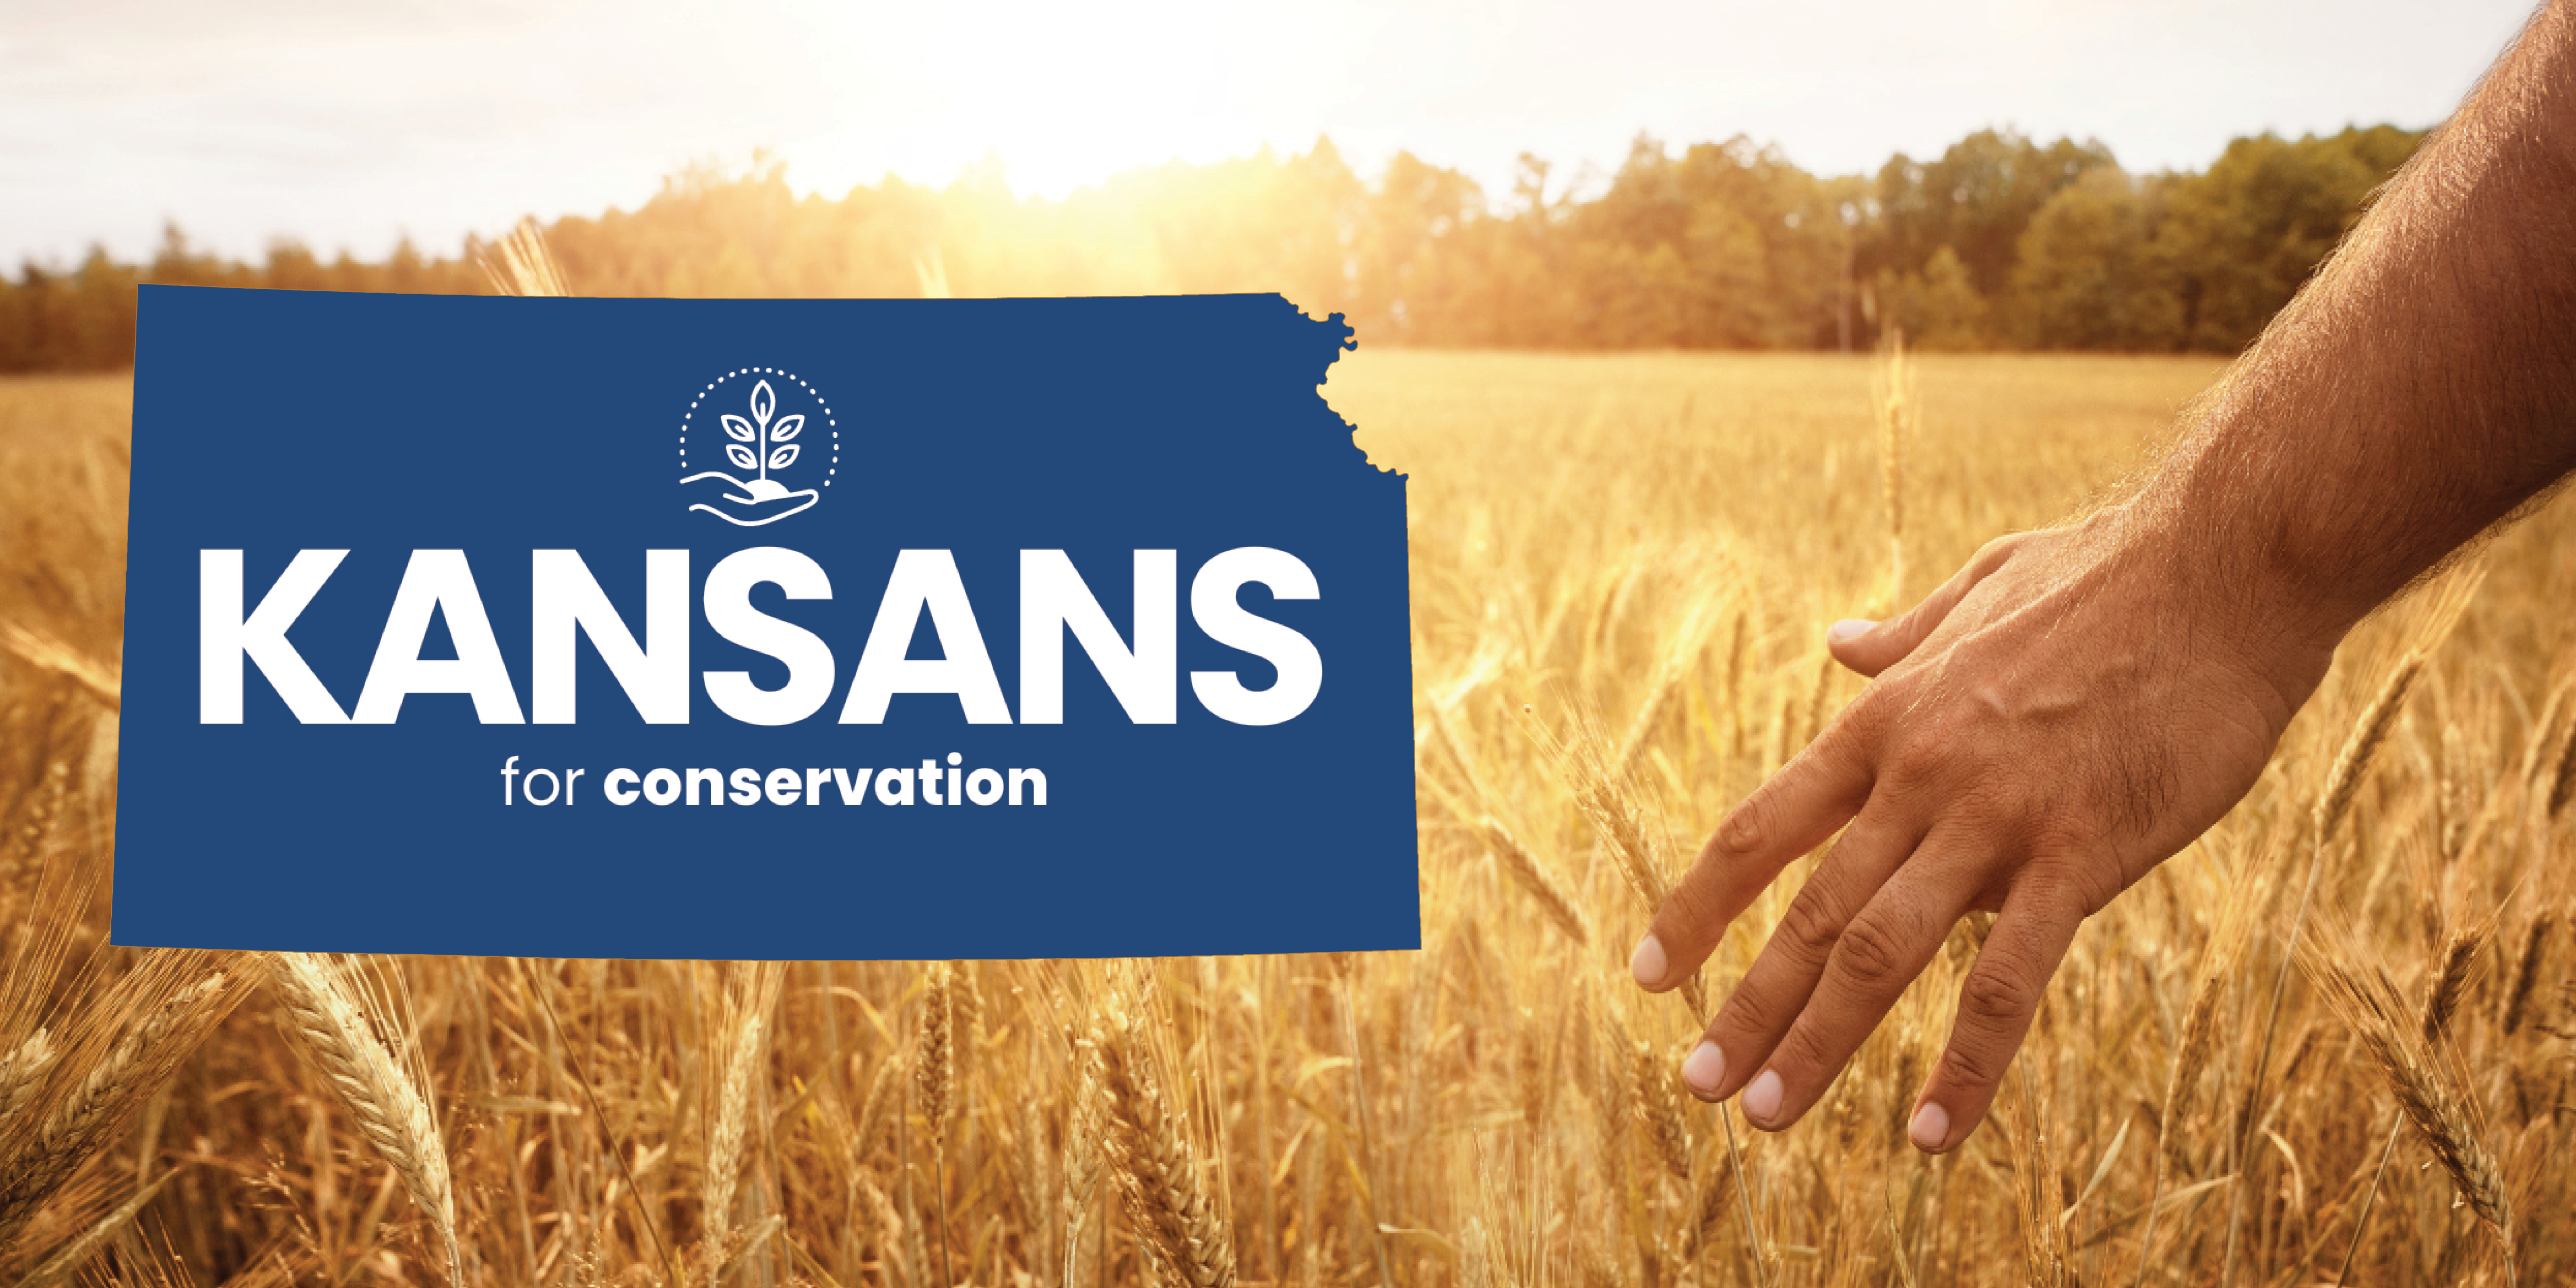 A graphic in the shape of Kansas overlaid with text reading, Kansans for conservation is superimposed over a photo of a field of wheat.